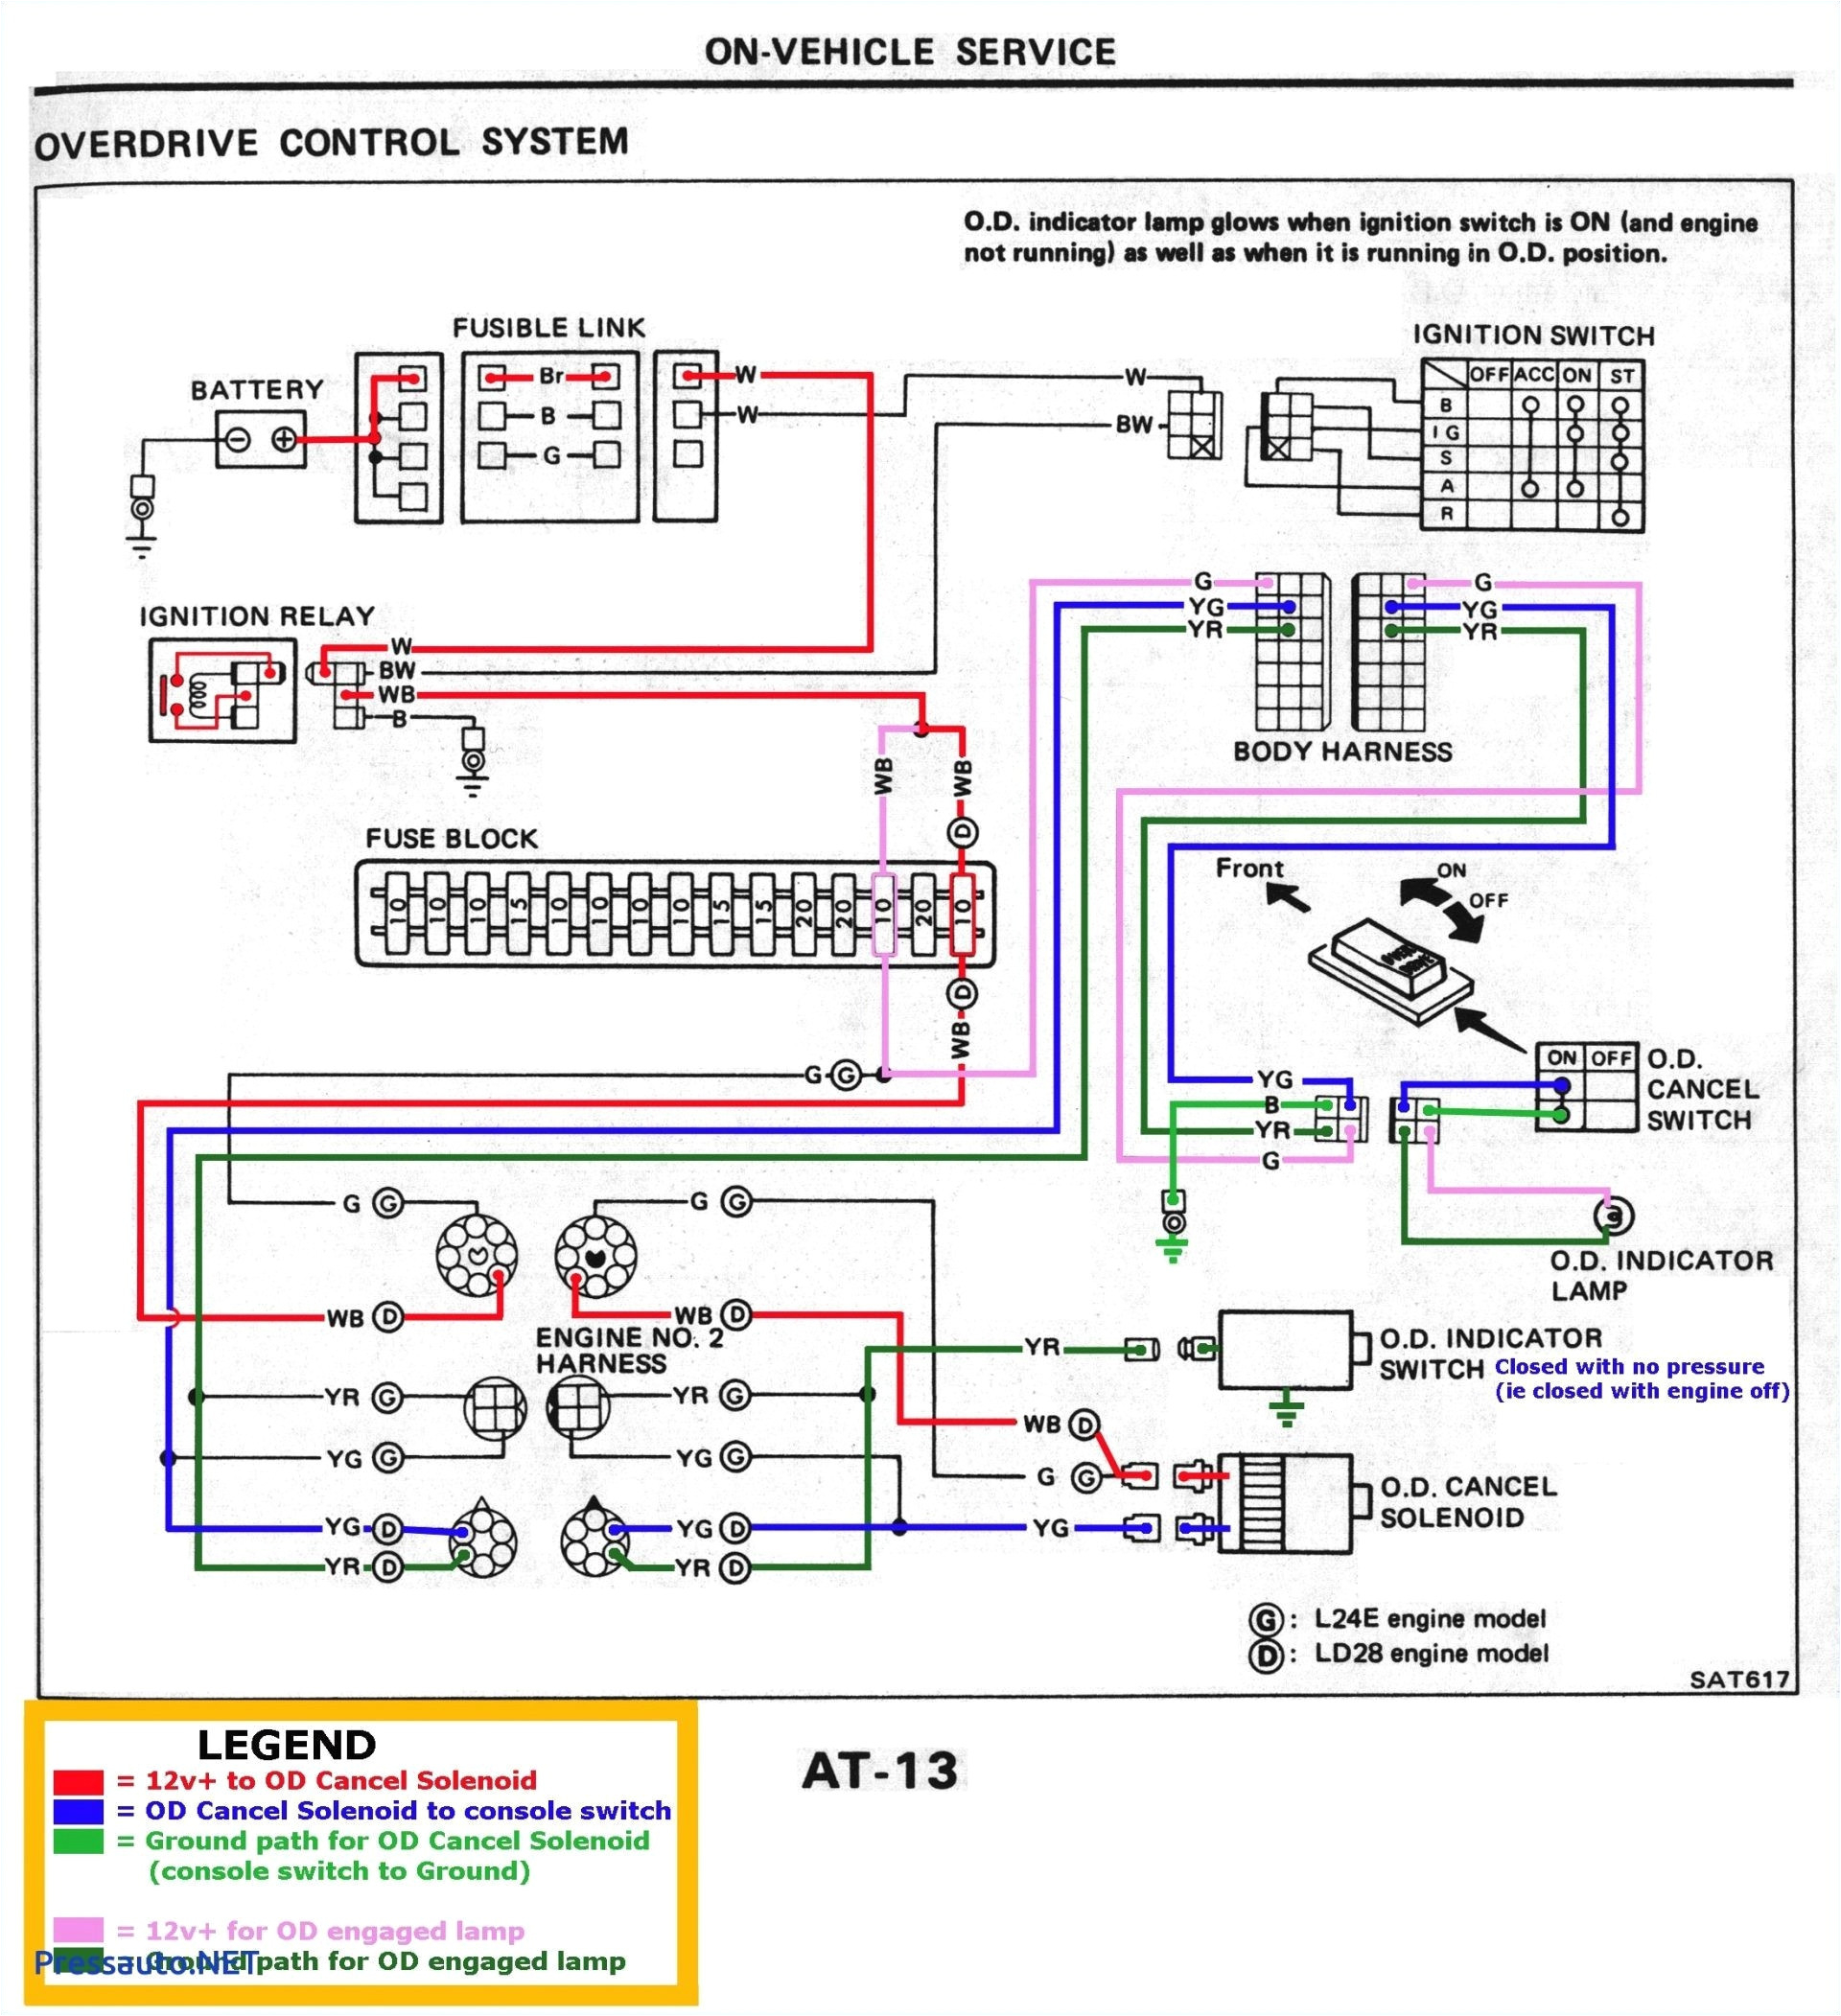 double gang box wiring diagram lovely 4 gang 2 way light switch wiring diagram valid 4